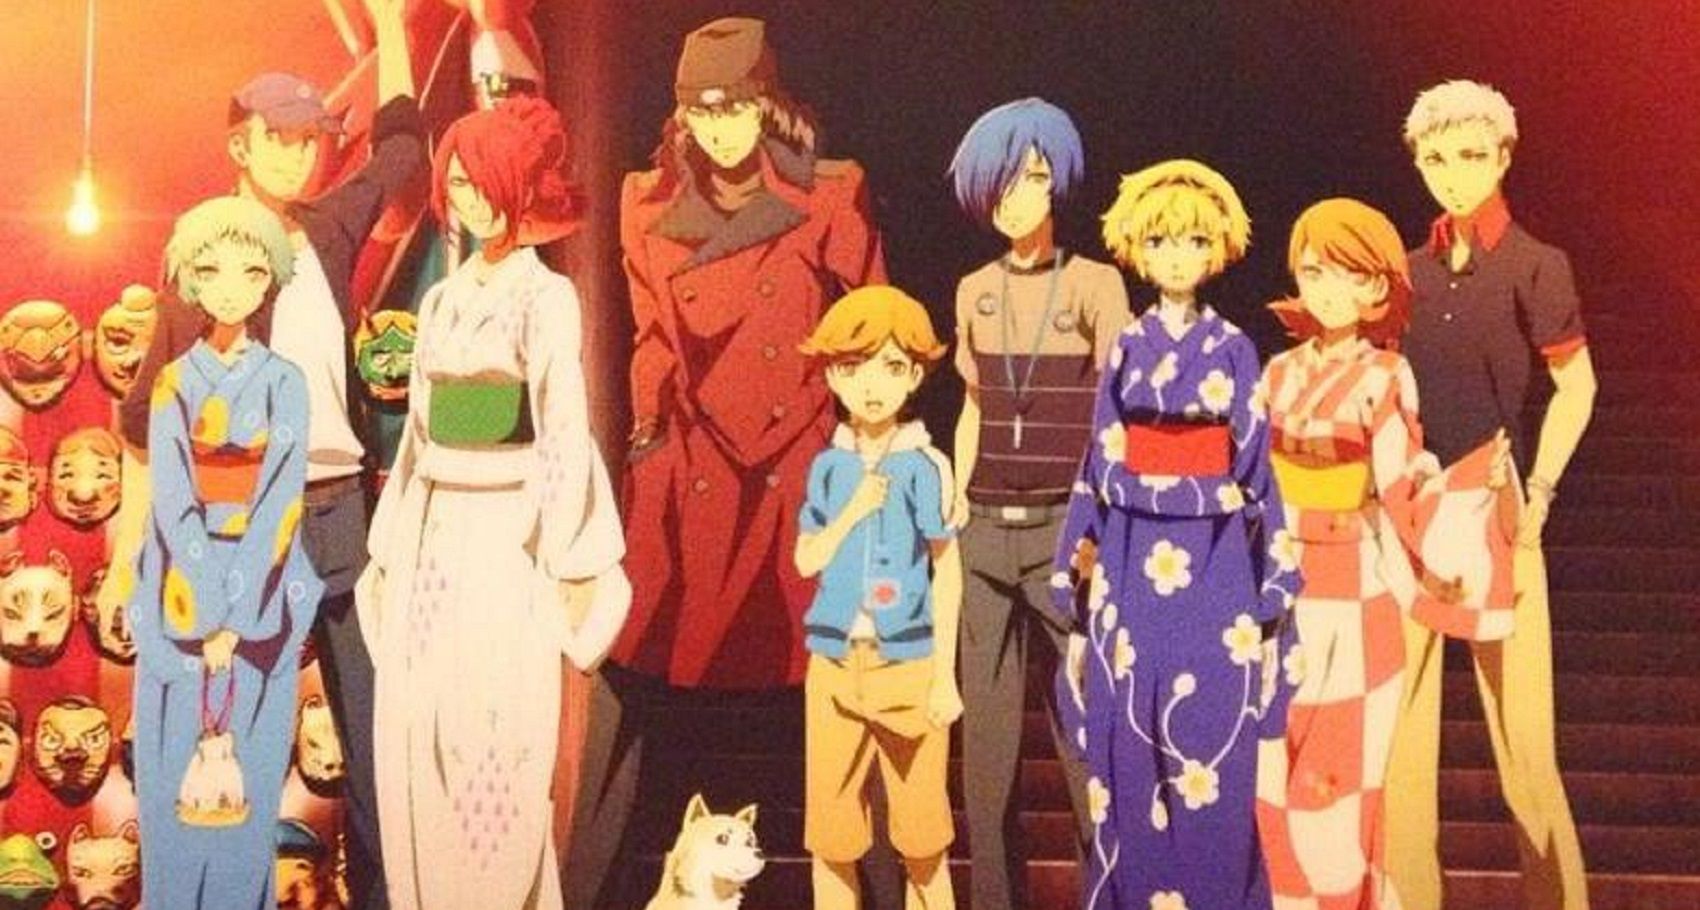 Persona 3: Every Member of SEES, Ranked According To Their Personas